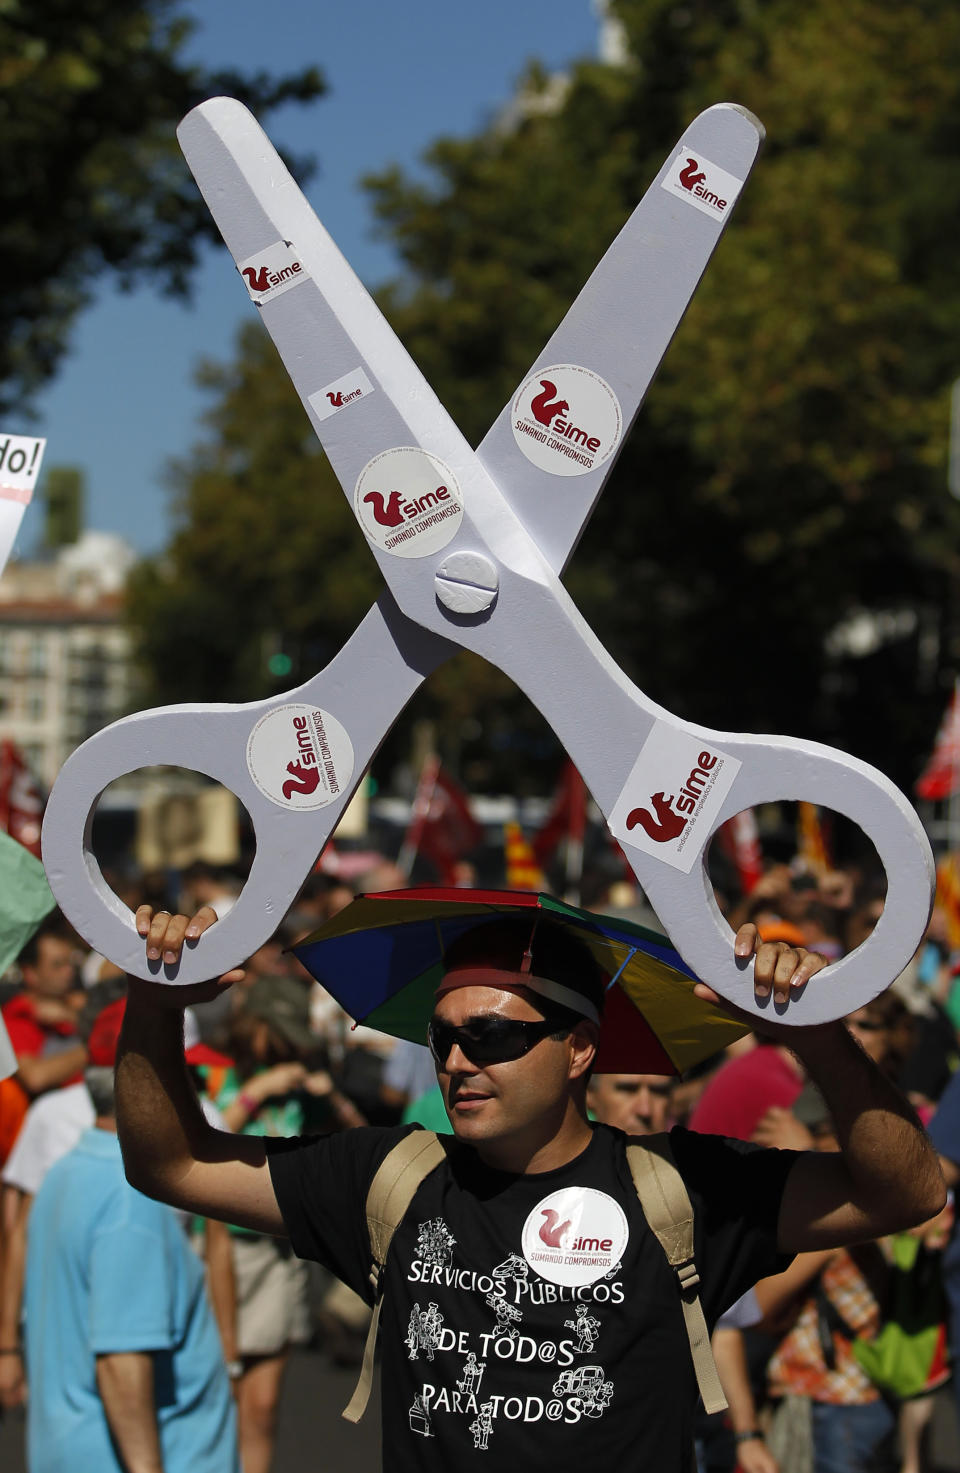 A man hold scissors in protest against austerity measures applied by the Spanish government, in Columbus Square in Madrid, Spain, Saturday, Sept. 15, 2012. Tens of thousands of people from all over the country converged on Madrid to hold a large anti-austerity demonstration on Saturday. By mid-morning several major roads had been blocked as buses unloaded protesters at 10 rendezvous points from which marches began.The demonstration was called to protest government cuts during the country's financial crisis. (AP Photo/Andres Kudacki)